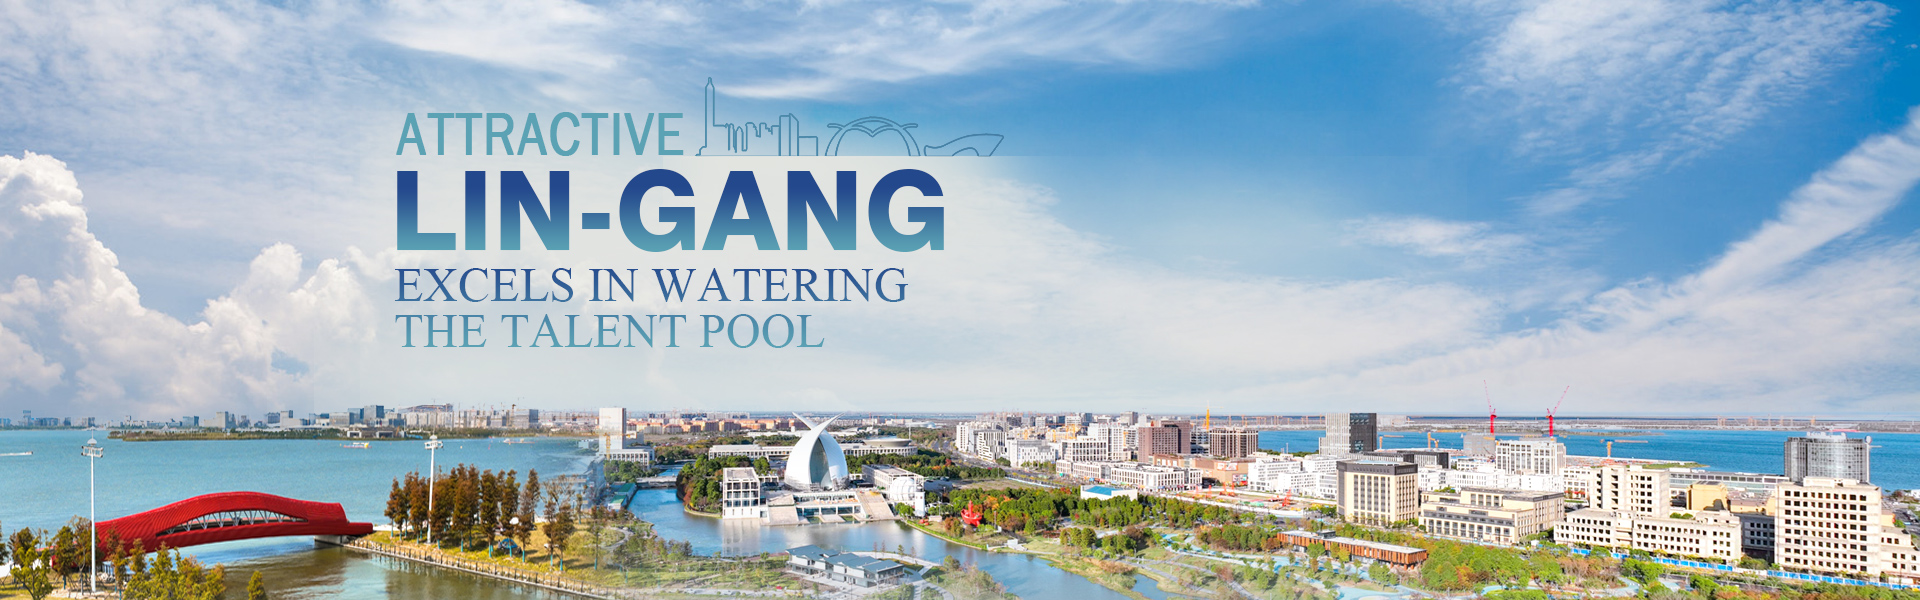 Attractive Lin-gang Special Area excels in watering the talent pool